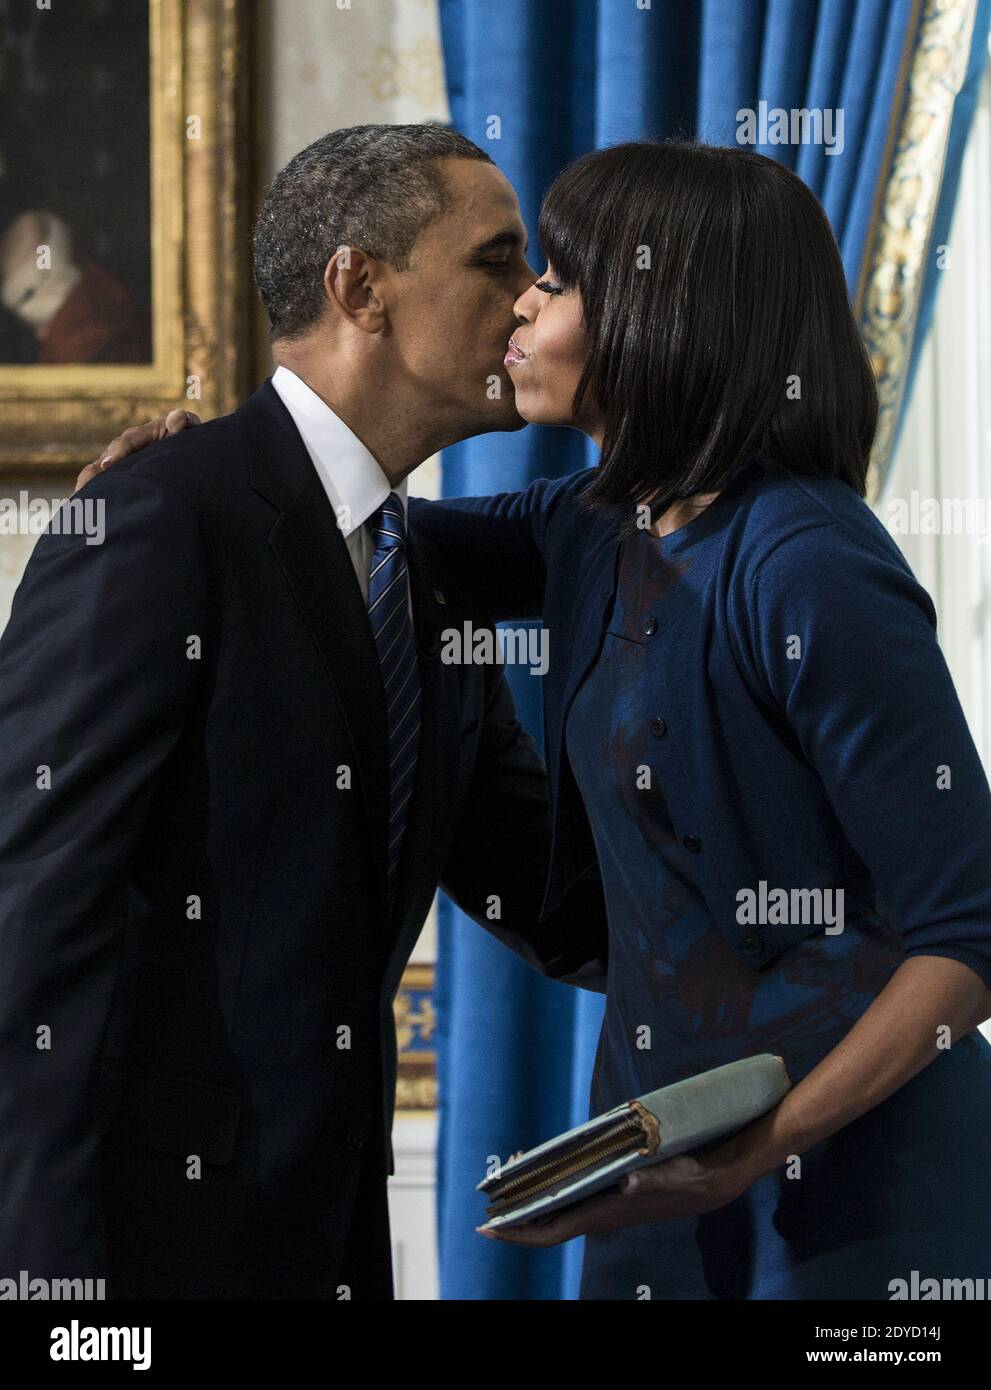 US President Barack Obama kisses US first lady Michelle Obama after being sworn in for a second term as President in the Blue Room of the White House in Washington, DC, USA, on January 20, 2013. Obama was officially sworn in for his second term as the 44th President of the United States during the 57th Presidential Inauguration but will also participate in a ceremonial swearing in on Monday. Photo by Brenda Smialowski/Pool/ABACAPRESS.COM Stock Photo